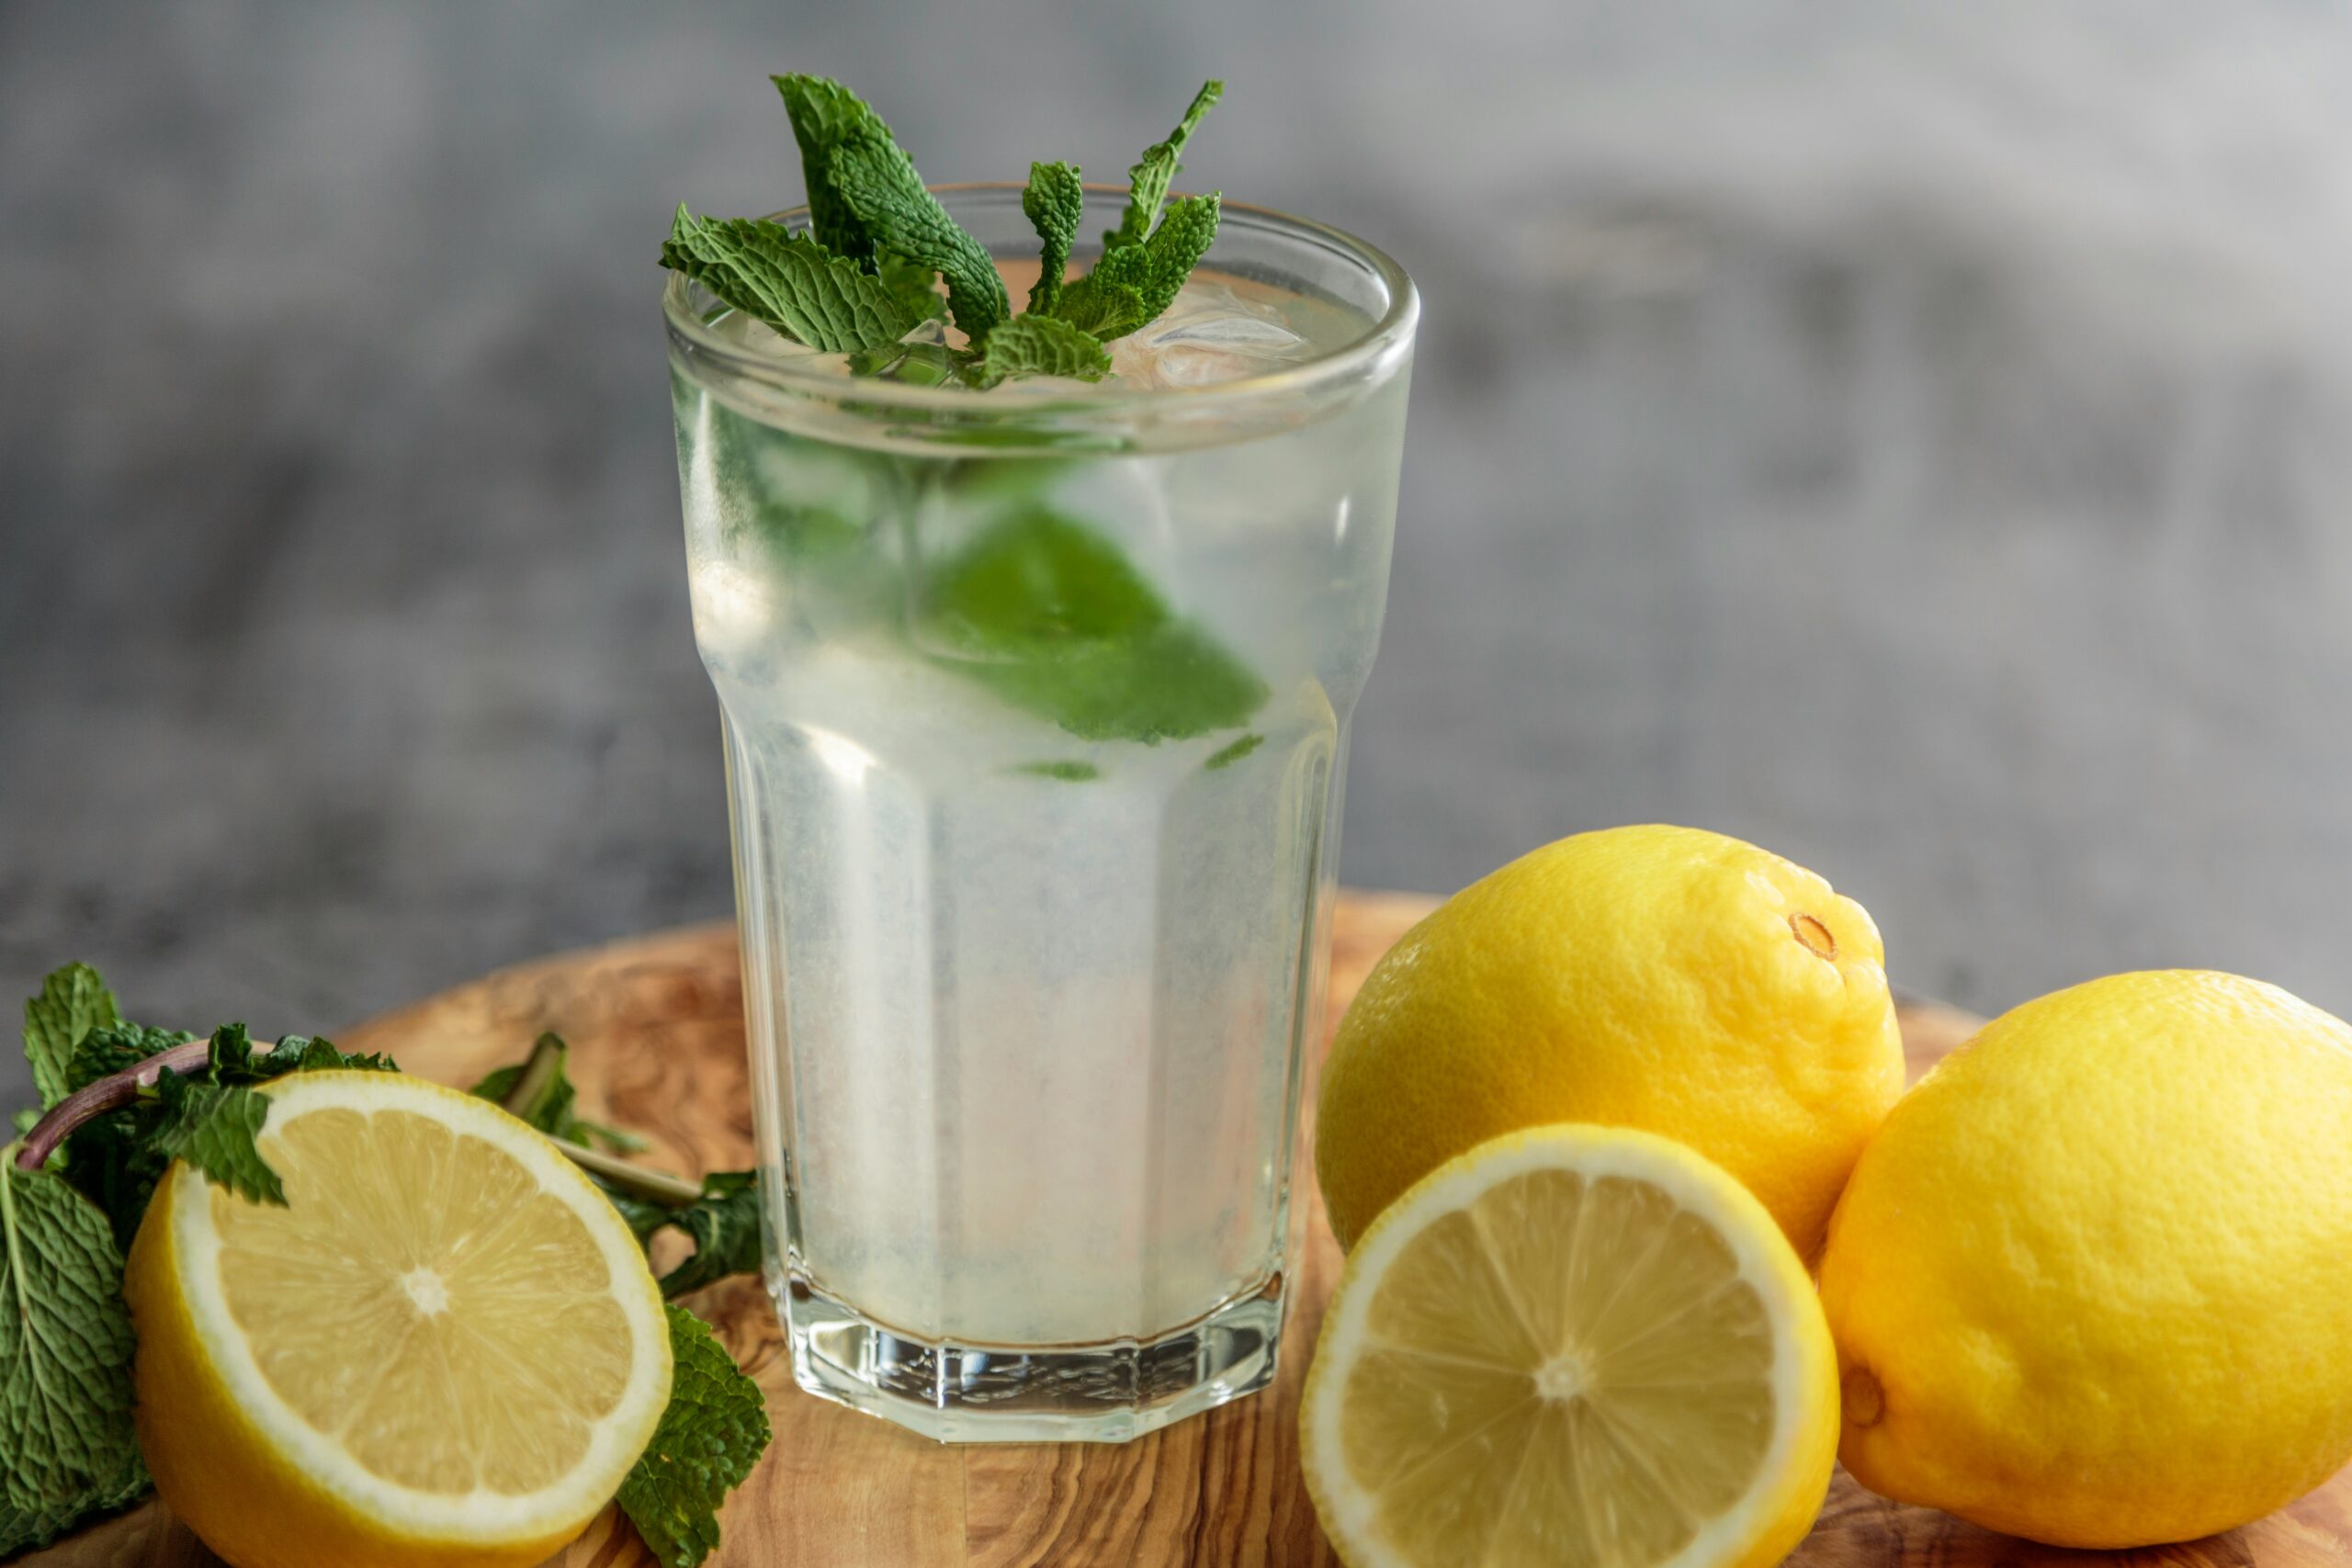 A refreshing lemonade with a twist, this cortisol mocktail is perfect for a hot summer day. Pictured: Lemonade